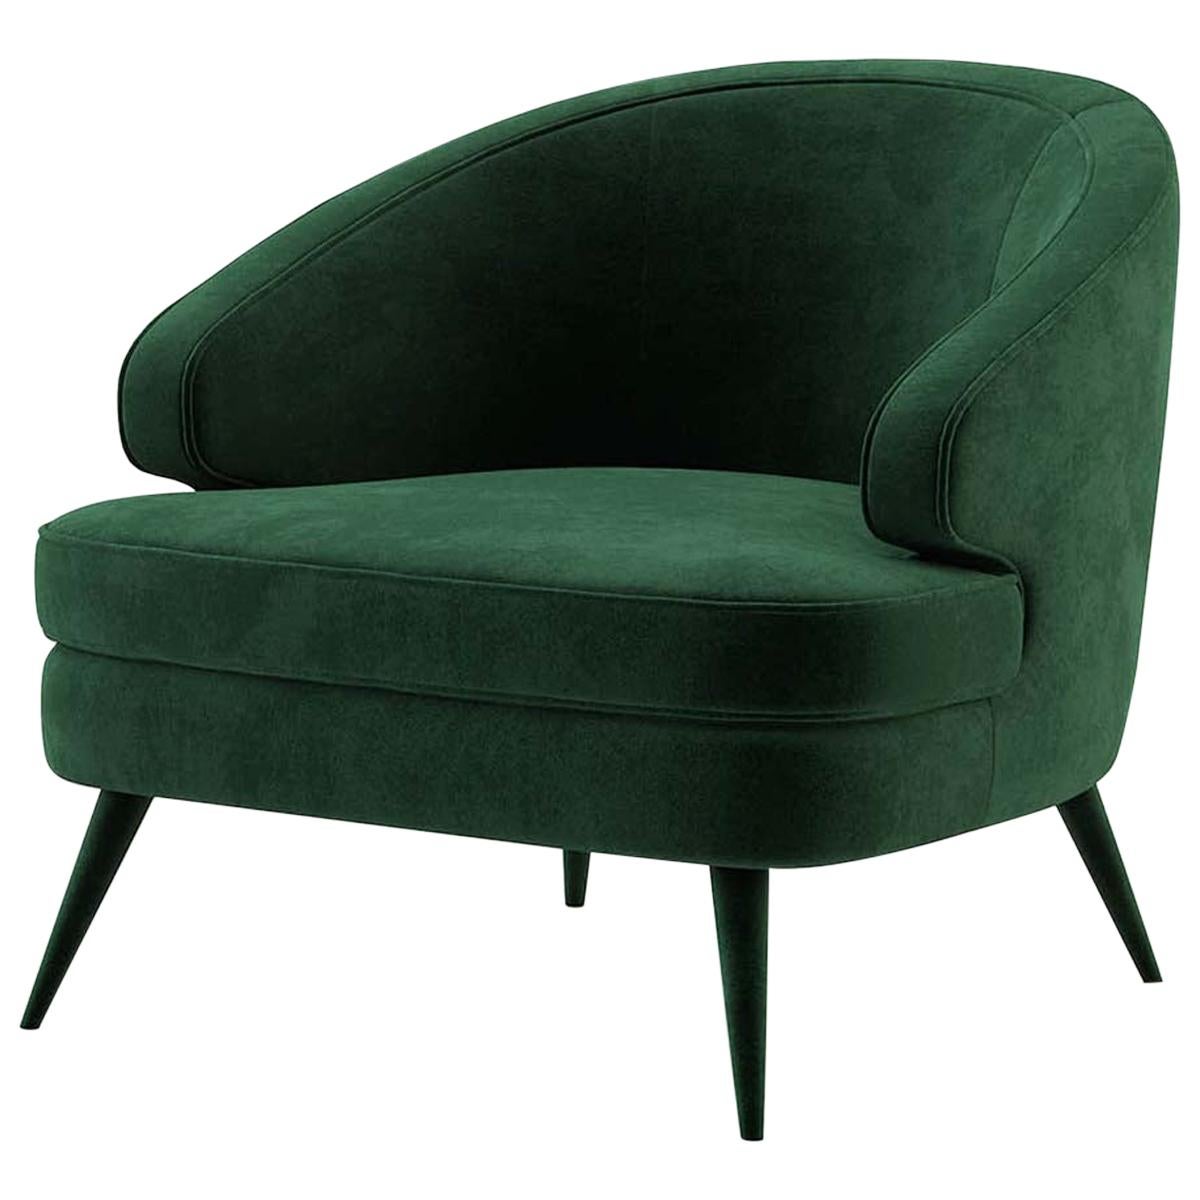 Peter Armchair For Sale